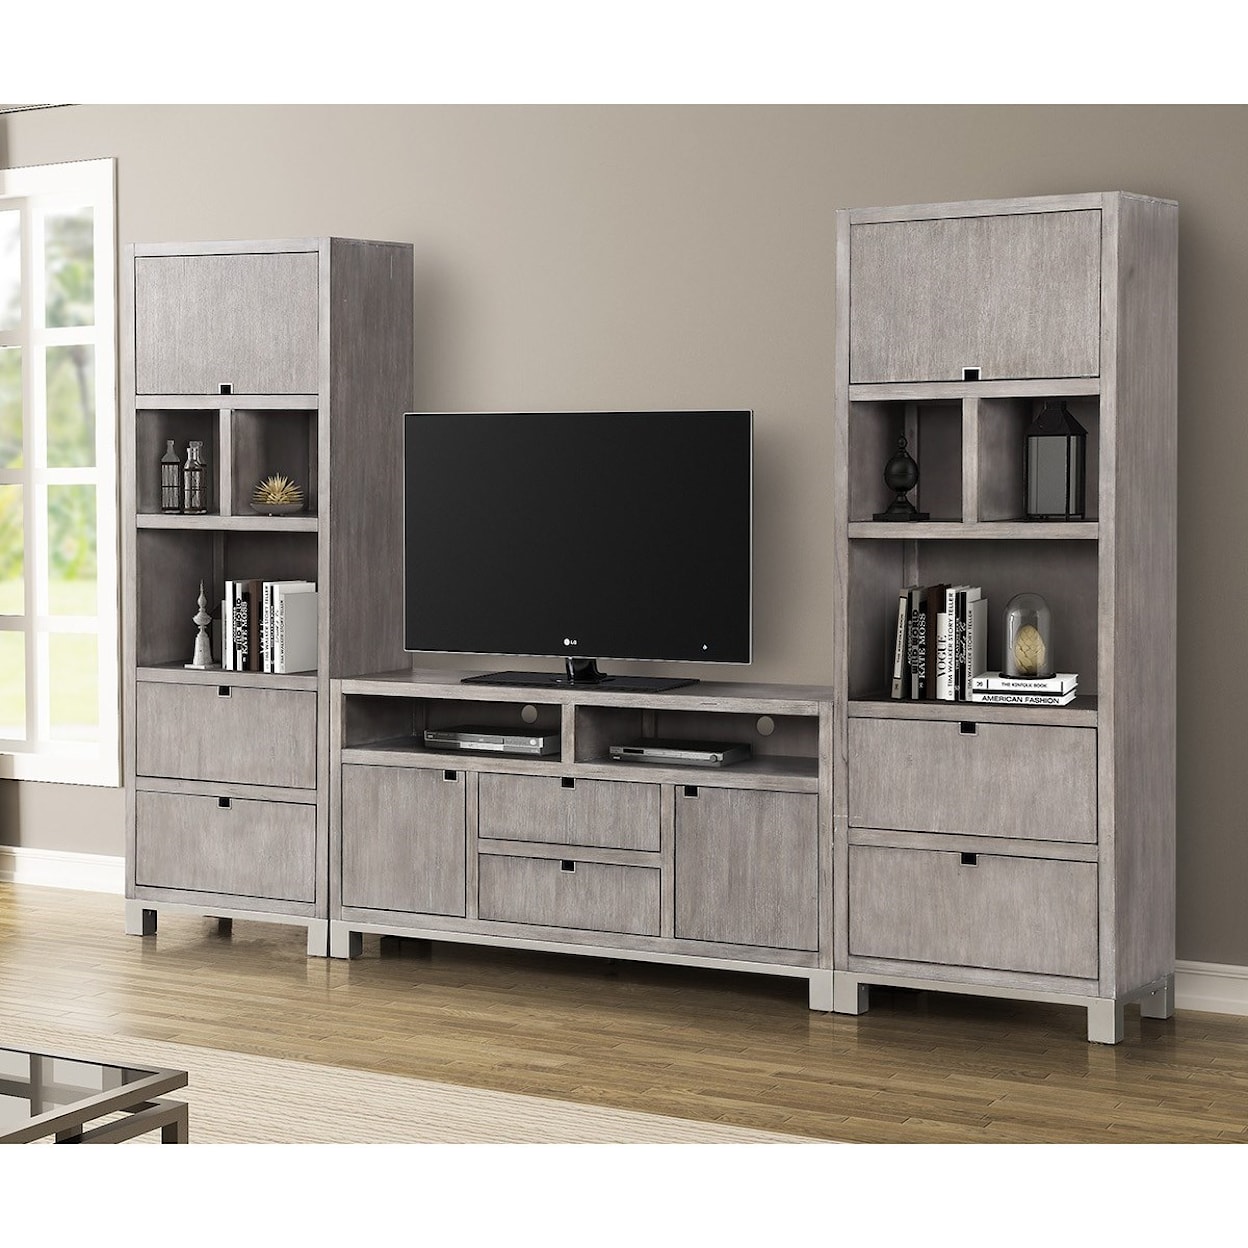 Legends Furniture Pacific Heights Entertainment Wall Unit